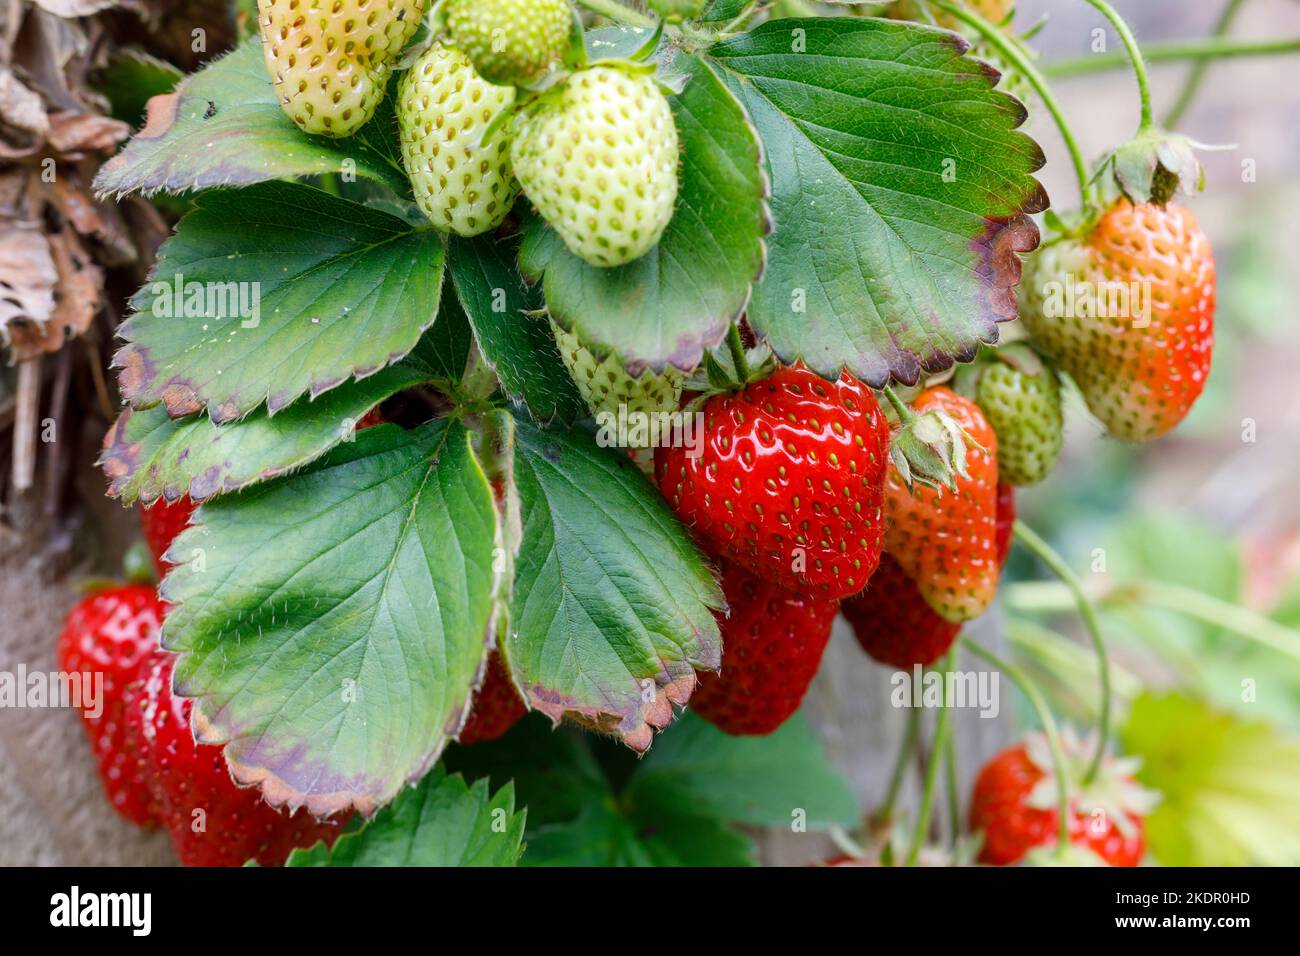 Strawberries growing outside in a garden planter, Sussex, UK Stock Photo